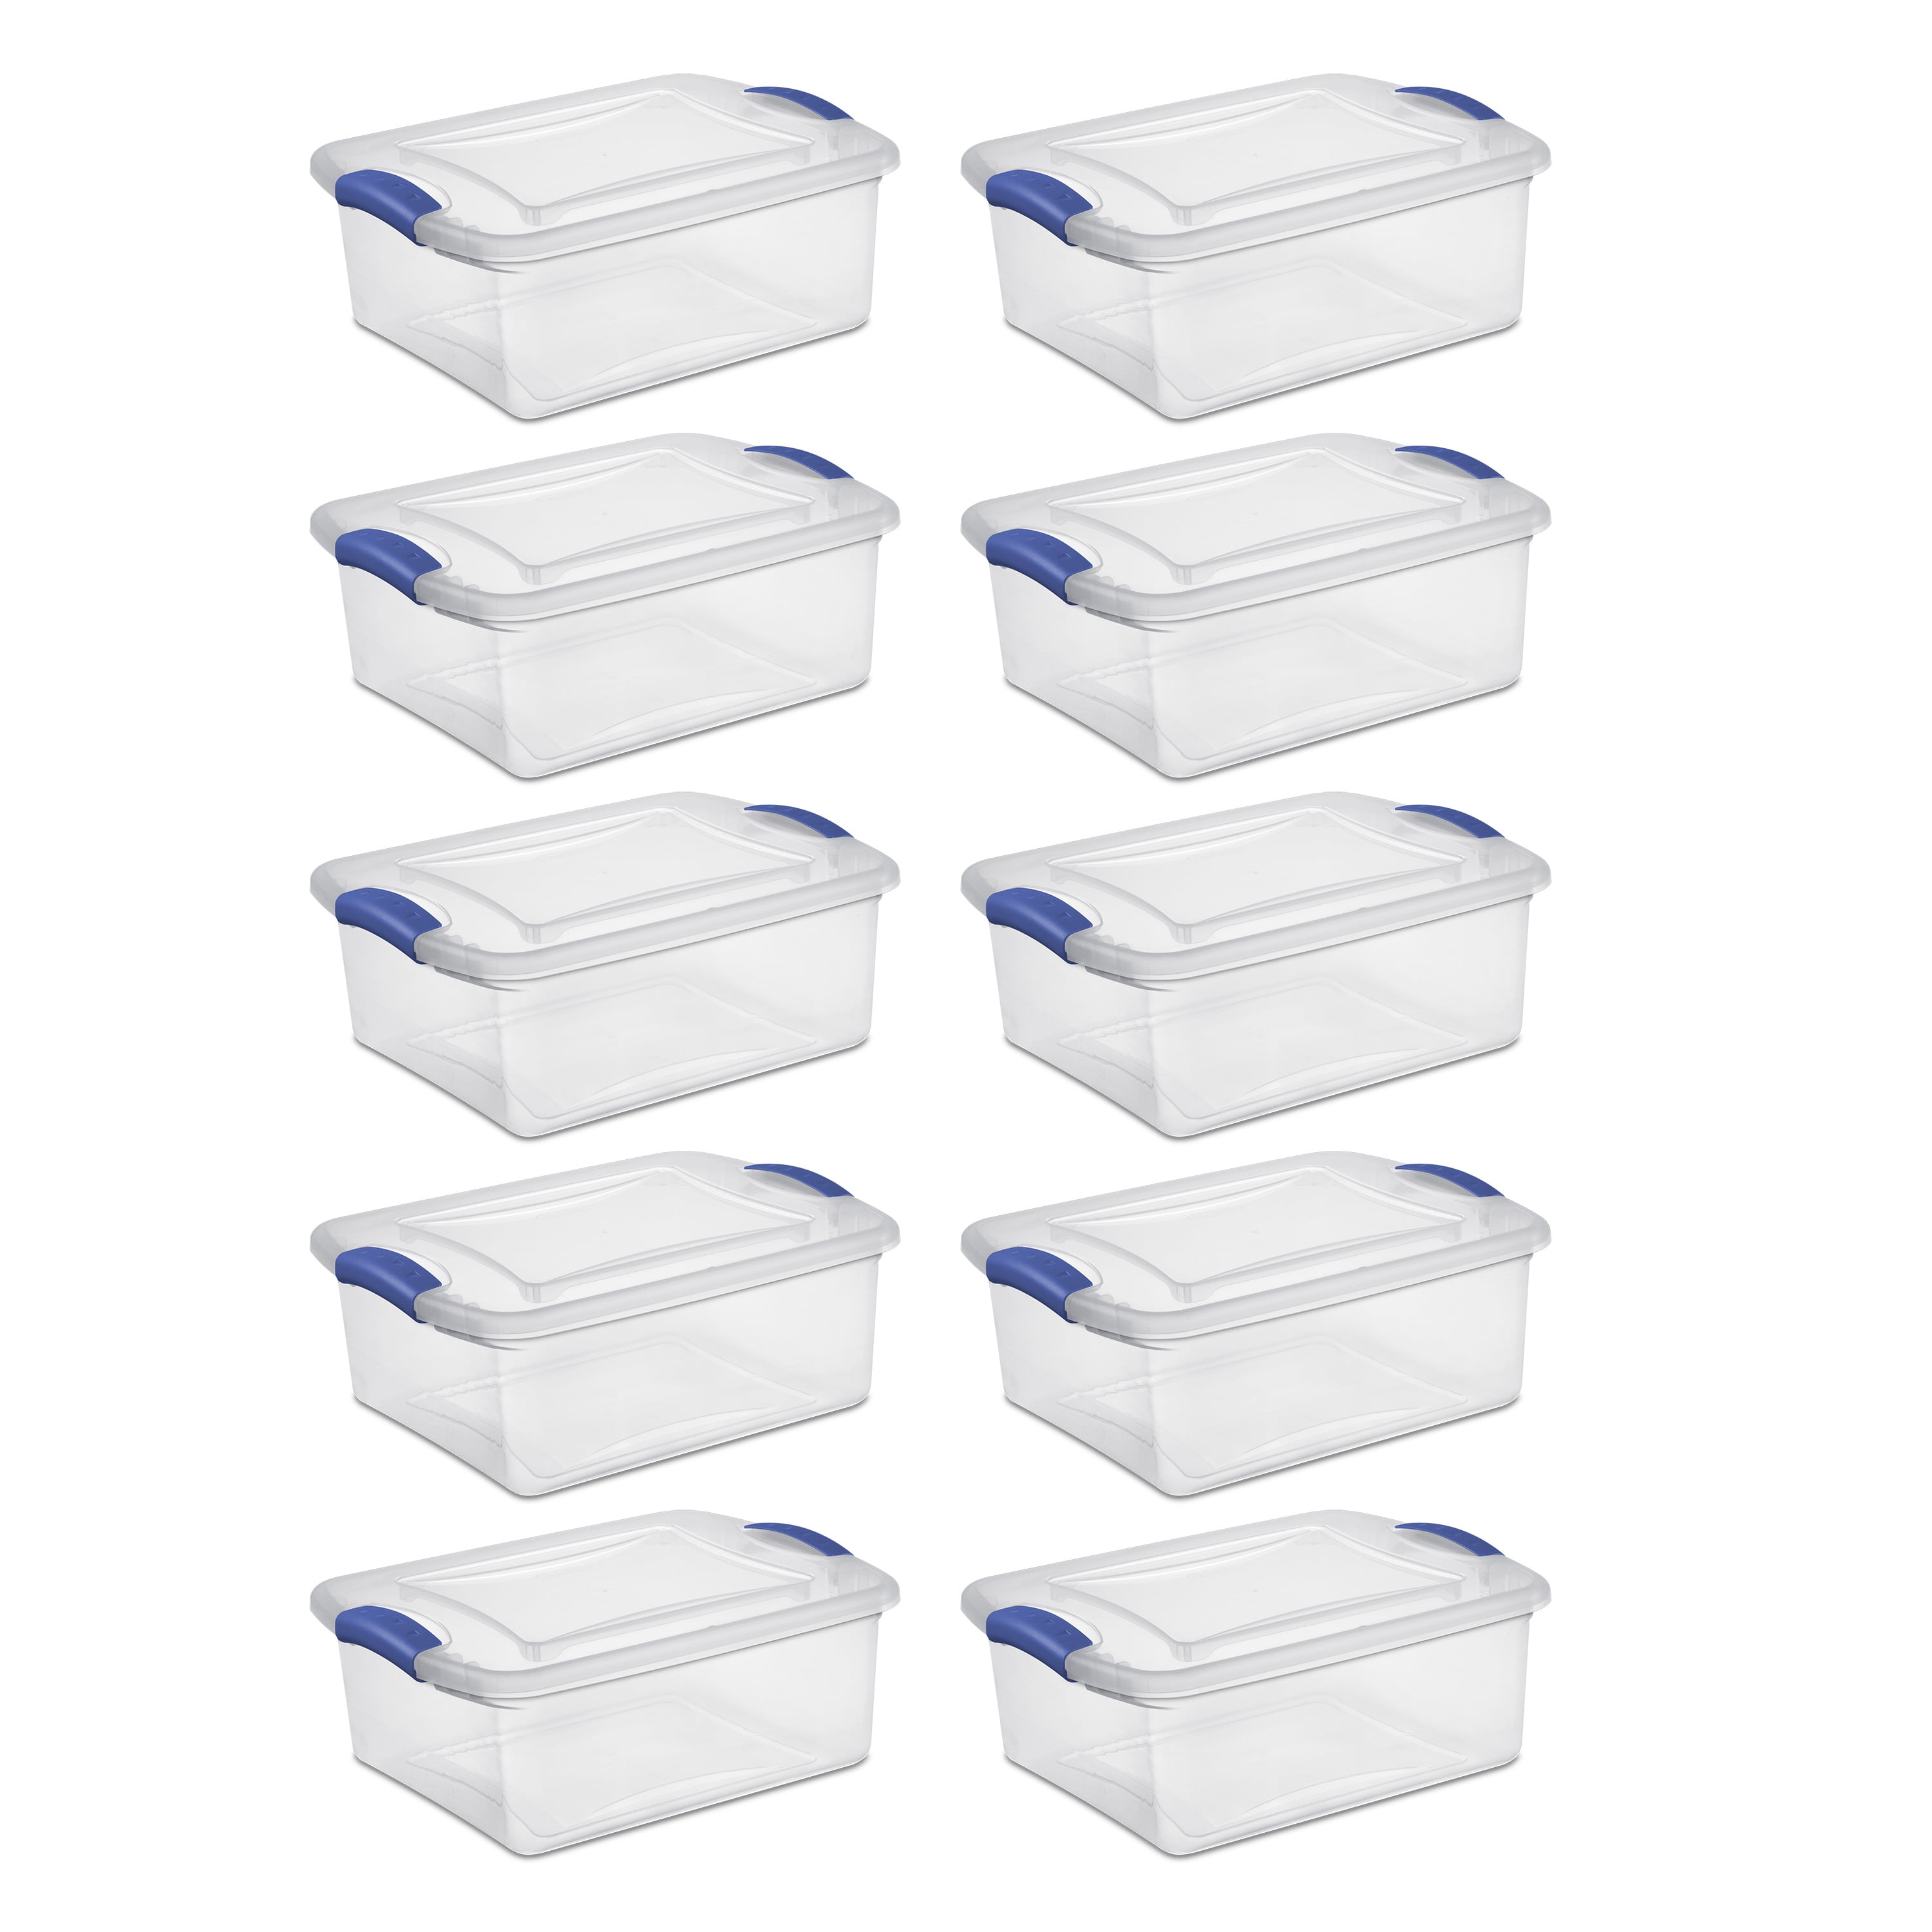 Attached Lid Tote Bin Storage Container Various Colors Bulk Quantities 